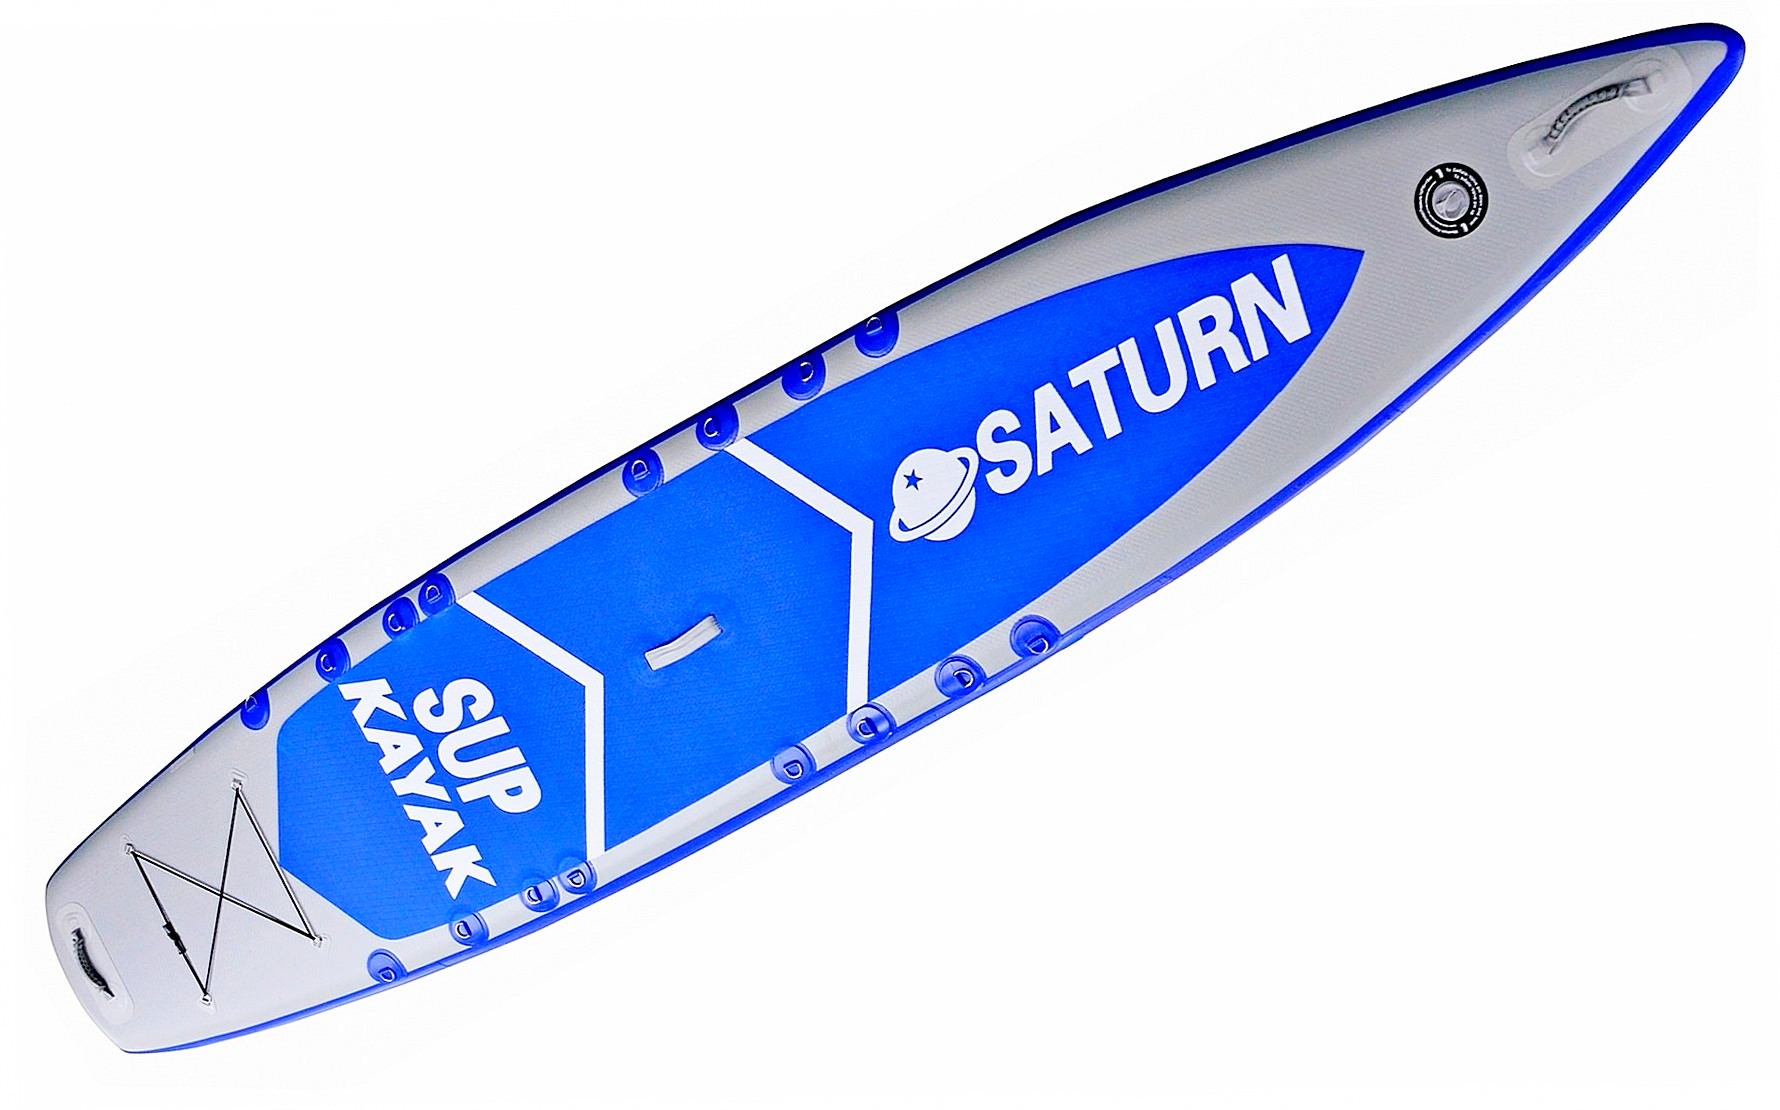 13.5' Inflatable SUP Paddle Board. Tandem Inflatable Kayak for 1-2